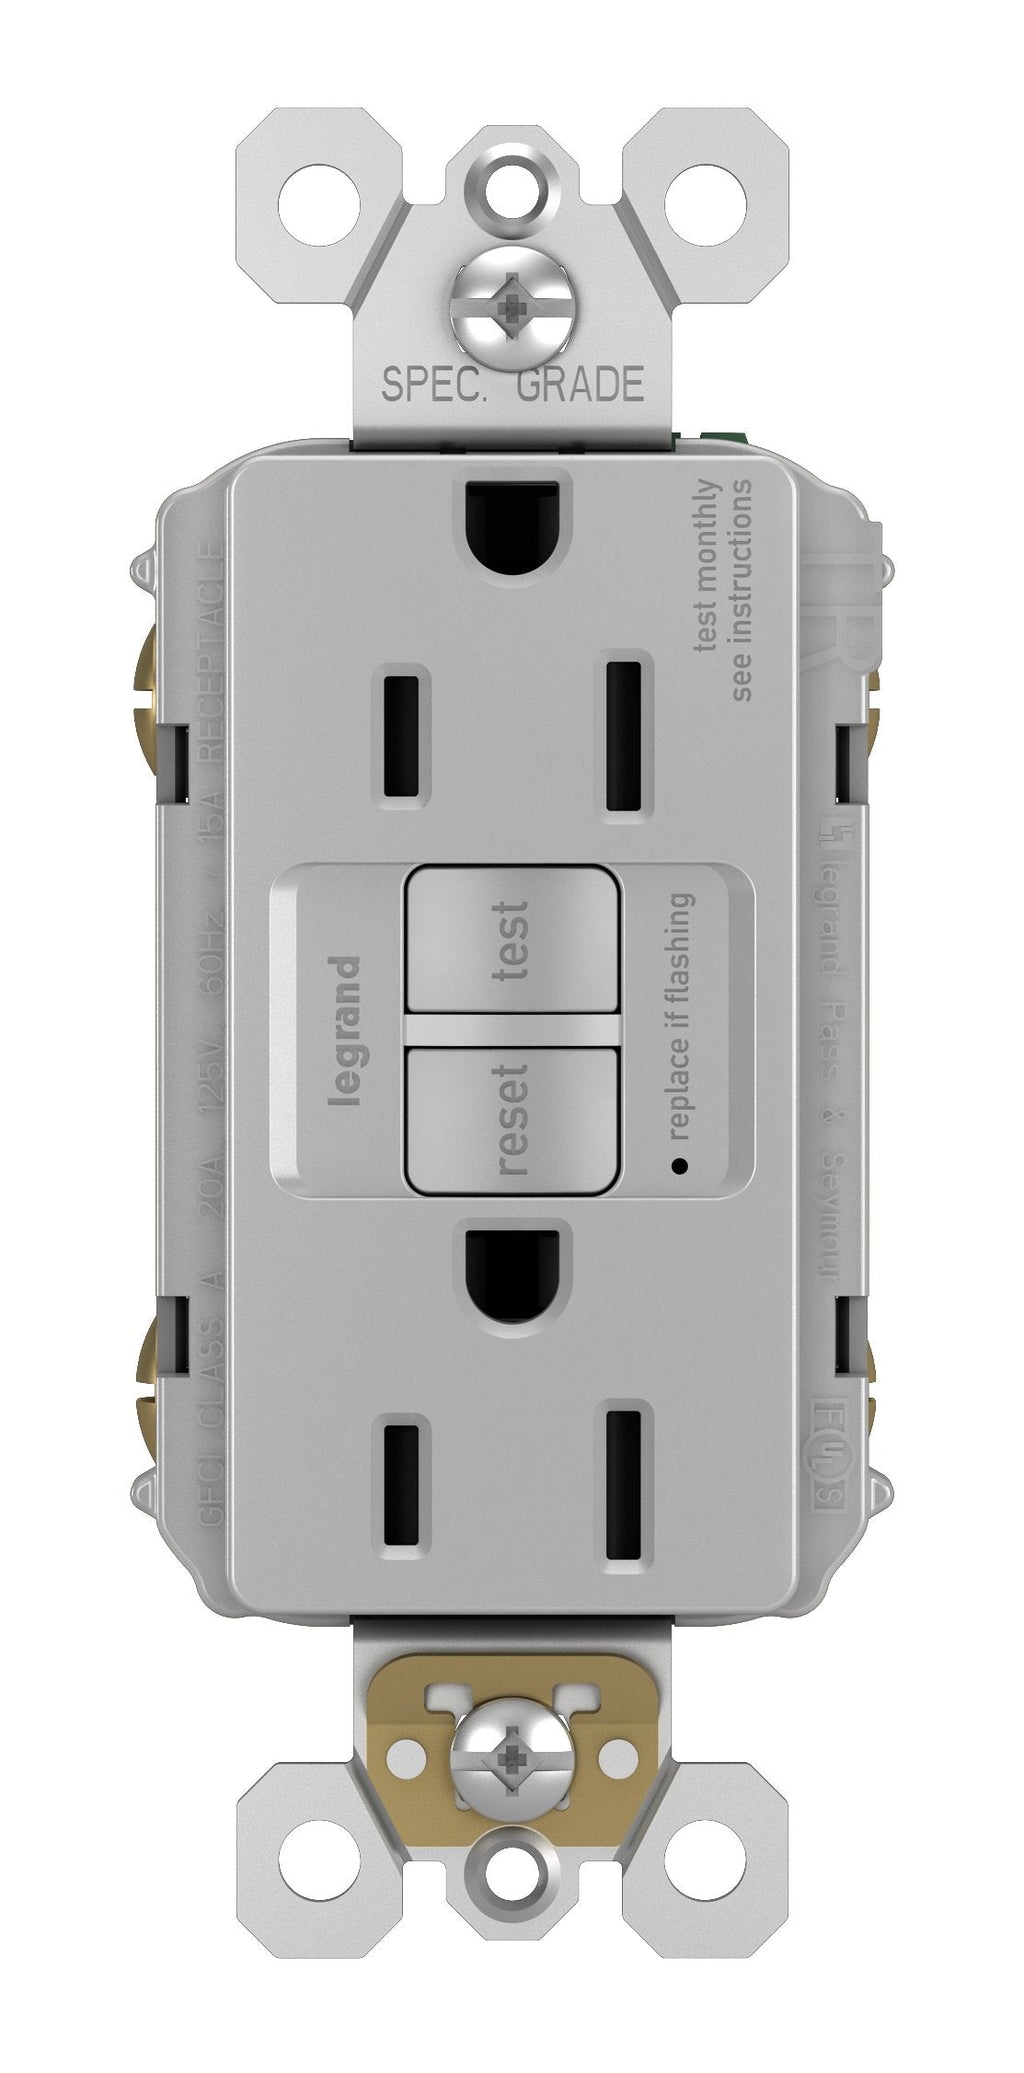 Legrand radiant Self-Test GFCI Outlet, Gray, 15 Amp, 1597GRYCCD12 Pack 1